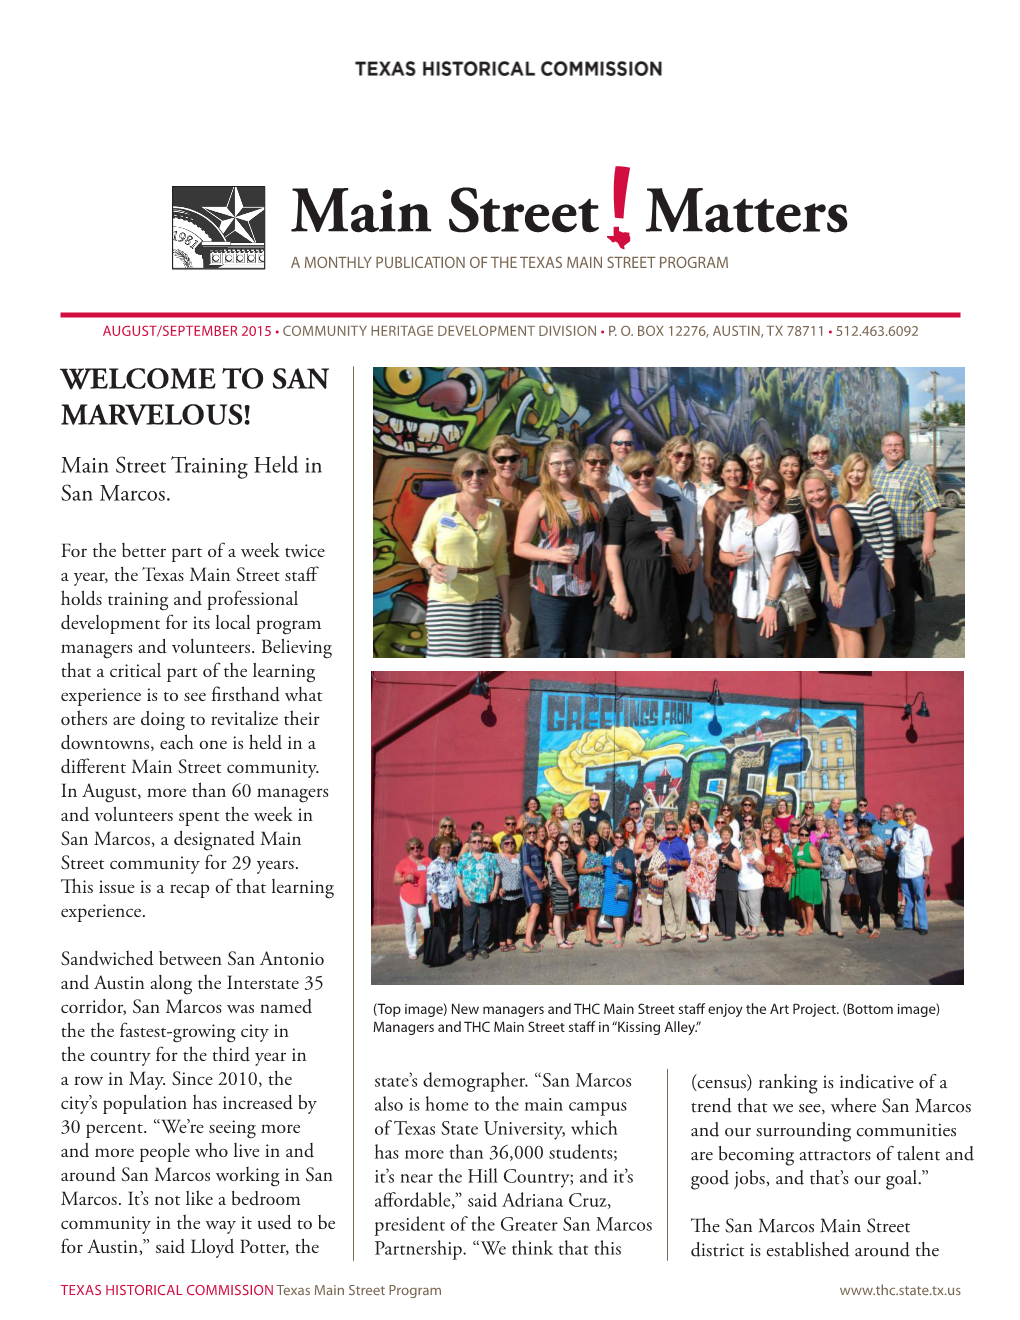 Street Matters a MONTHLY PUBLICATION of the TEXAS MAIN STREET PROGRAM